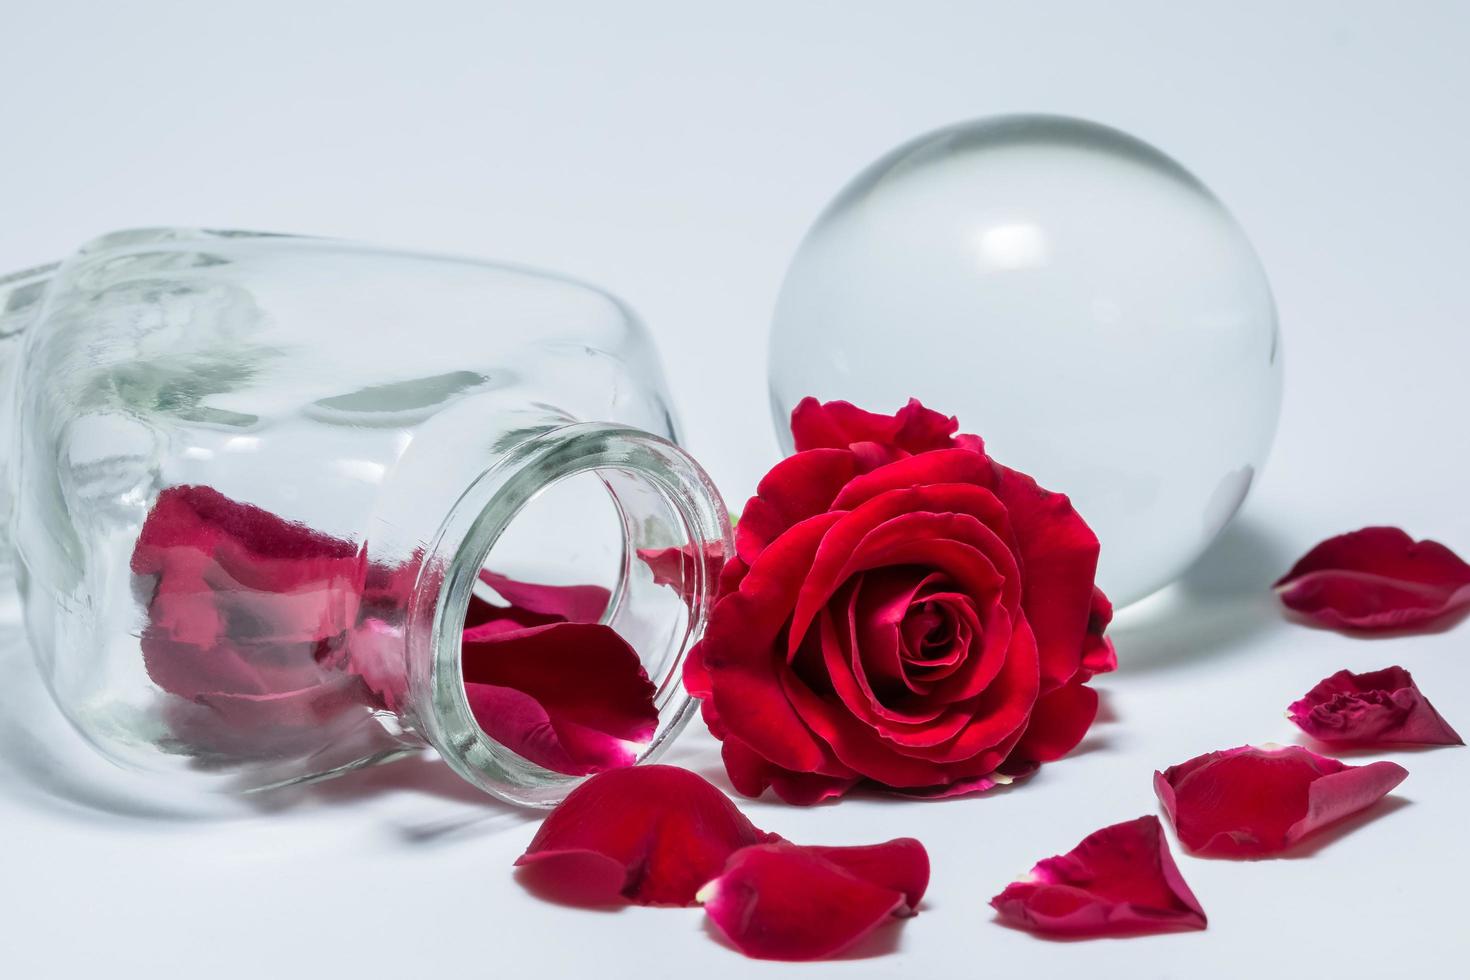 Red roses and glass vase on white background photo